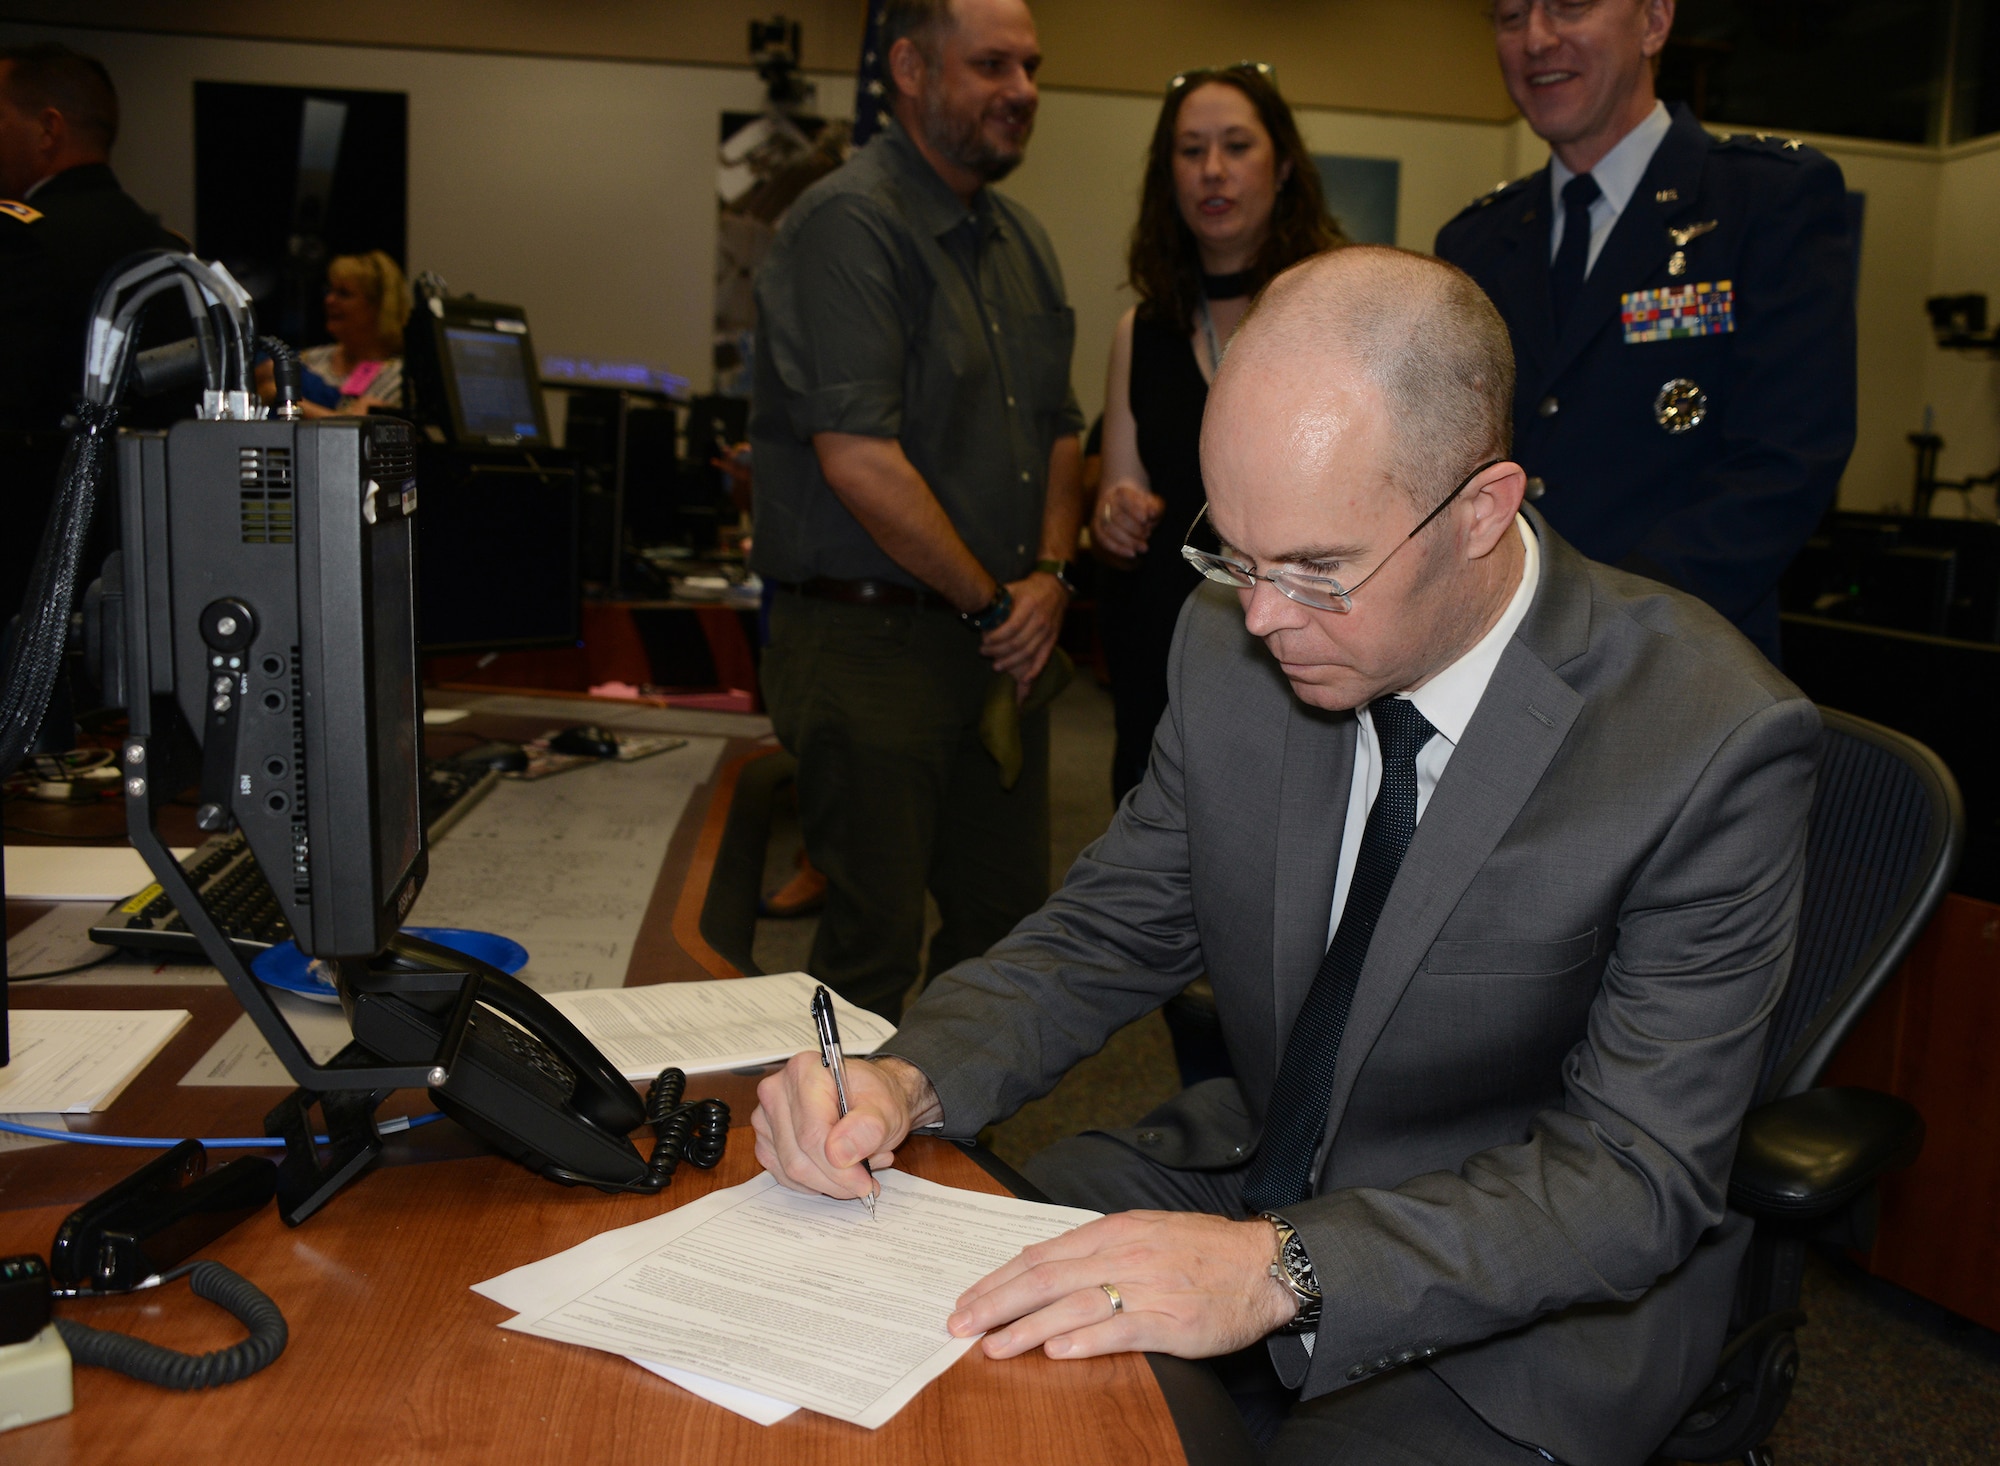 Dr. Benjamin Johansen, signs his name, becoming a captain in the Air Force Reserve assigned to the 433rd Airlift Wing, Joint Base San Antonio-Lackland, Texas, as a flight surgeon. He was administered the commissioning oath by Army Lt. Col. Anne McClain, an astronaut on the International Space Station, 210 miles above earth. (Air Force photo/Master Sgt. Chance Babin)